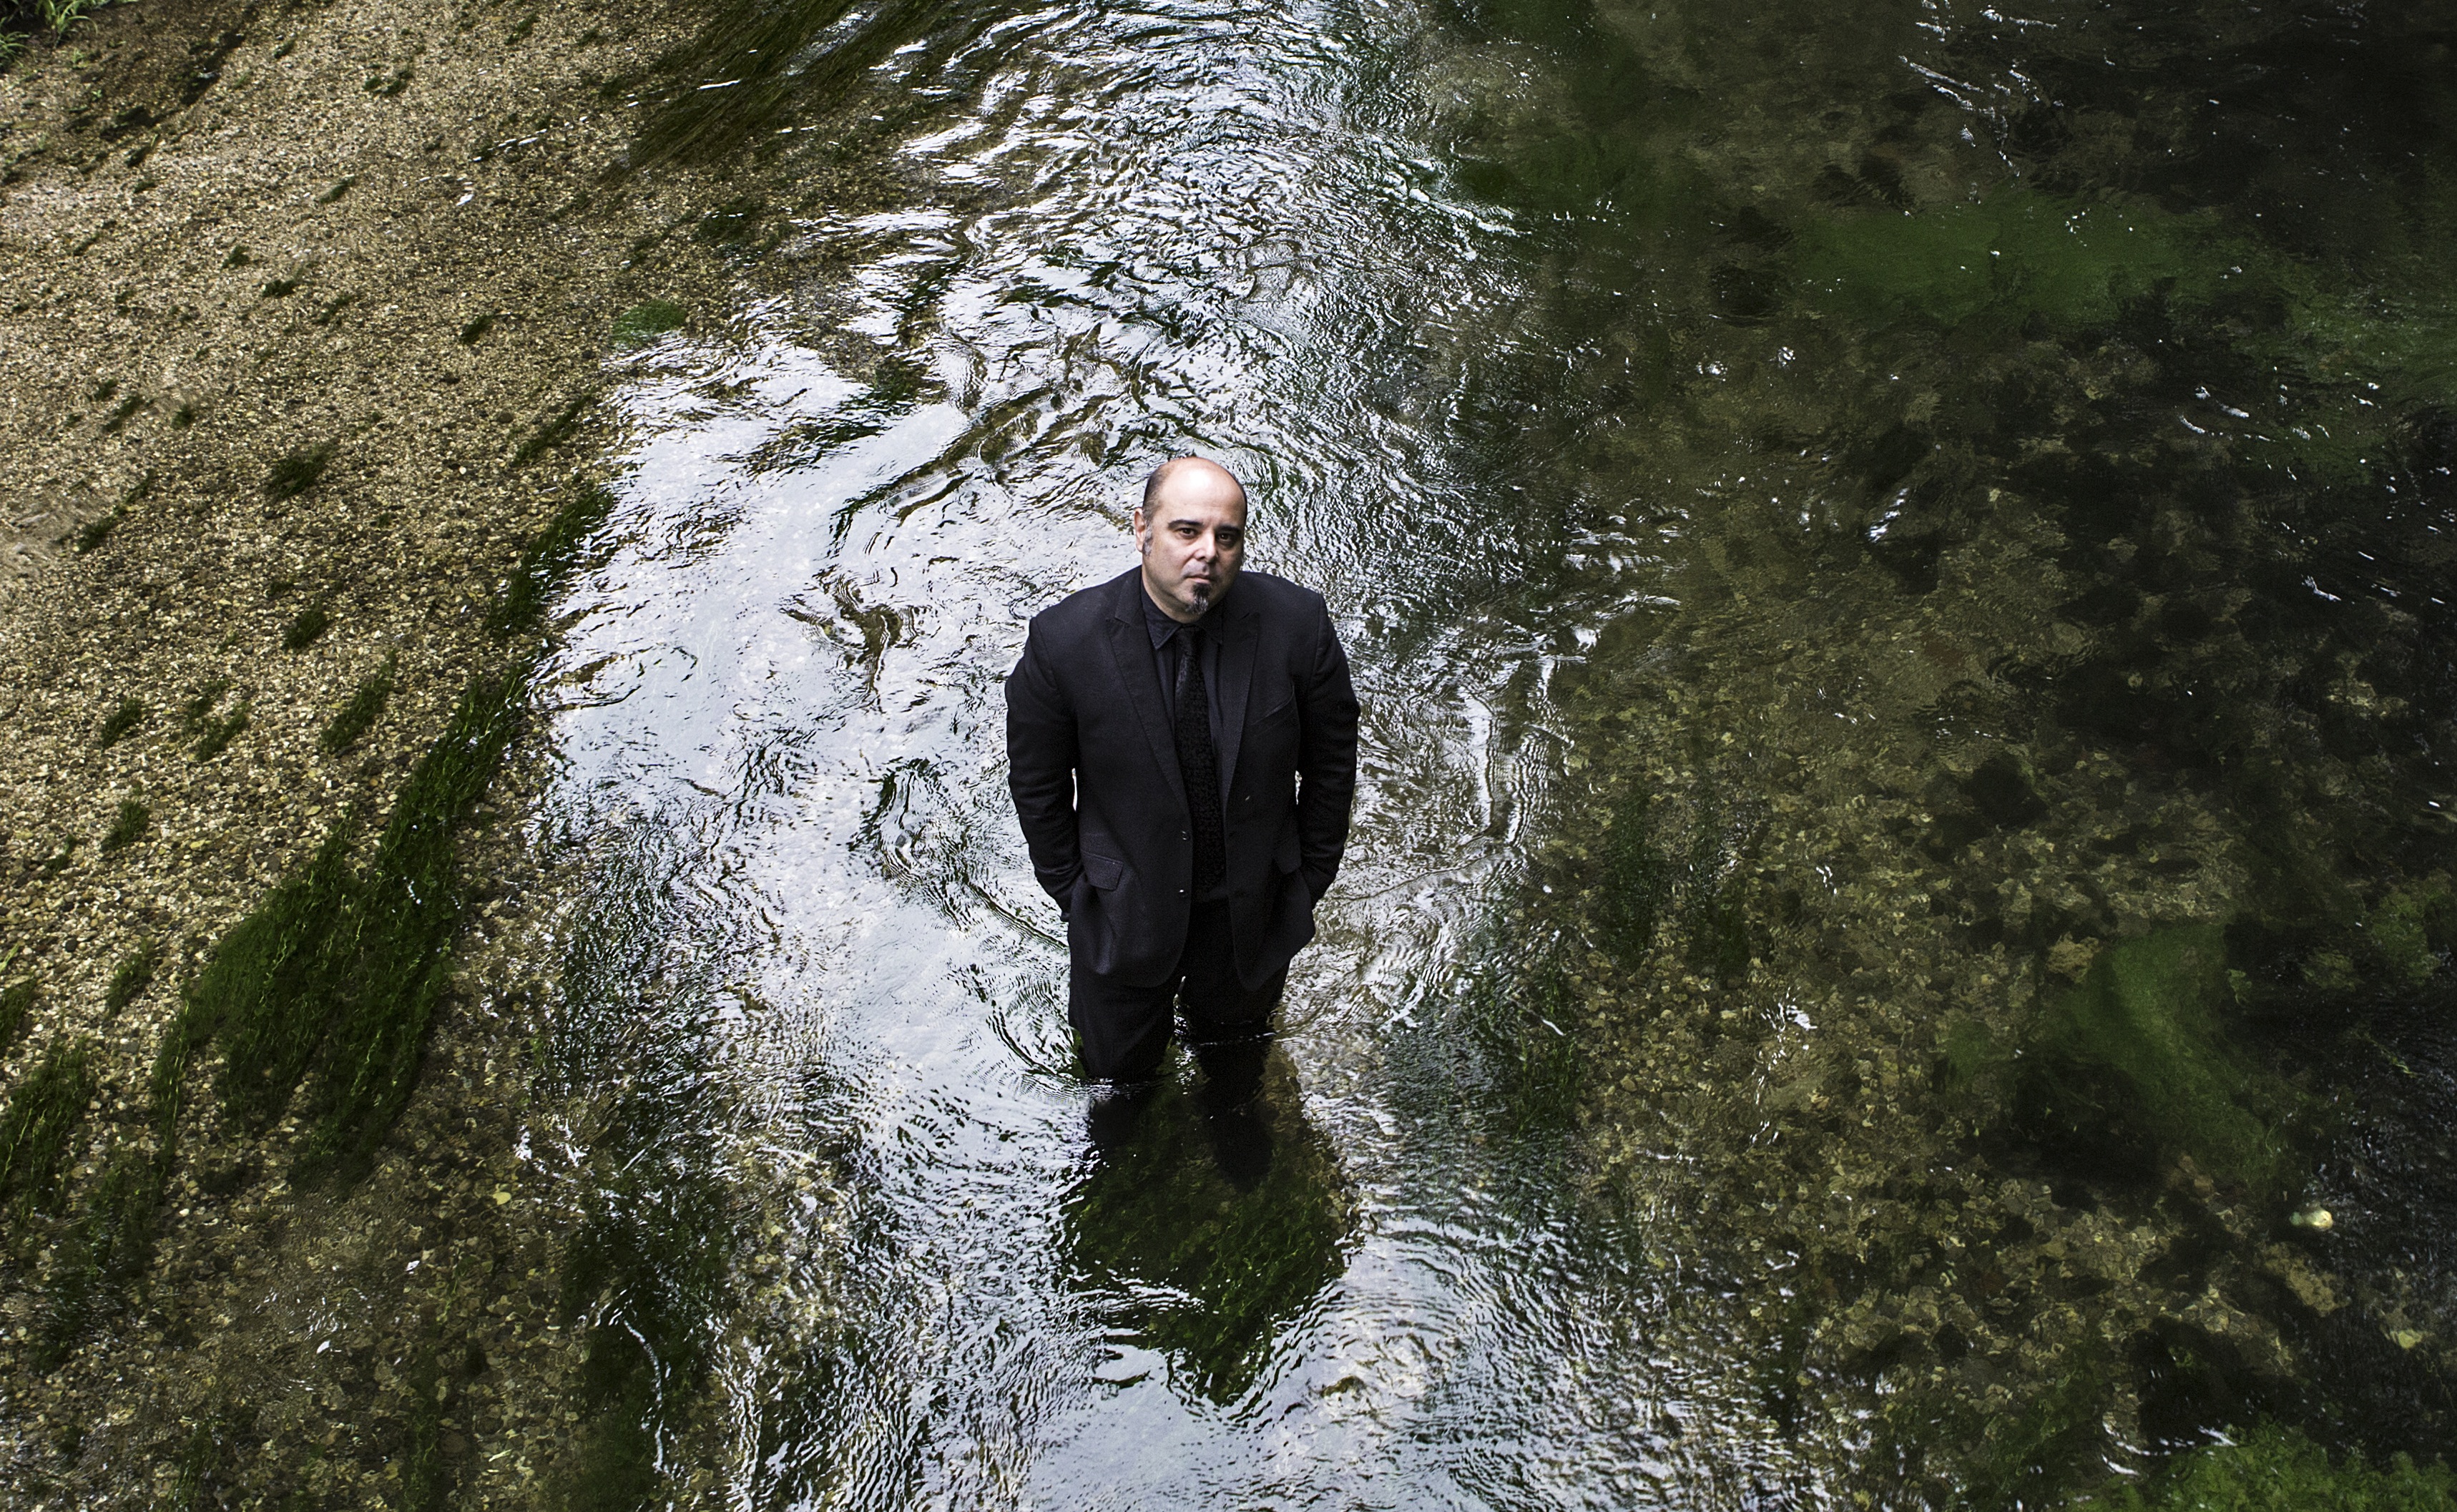 “Looking for essence” – Interview with Teho Teardo